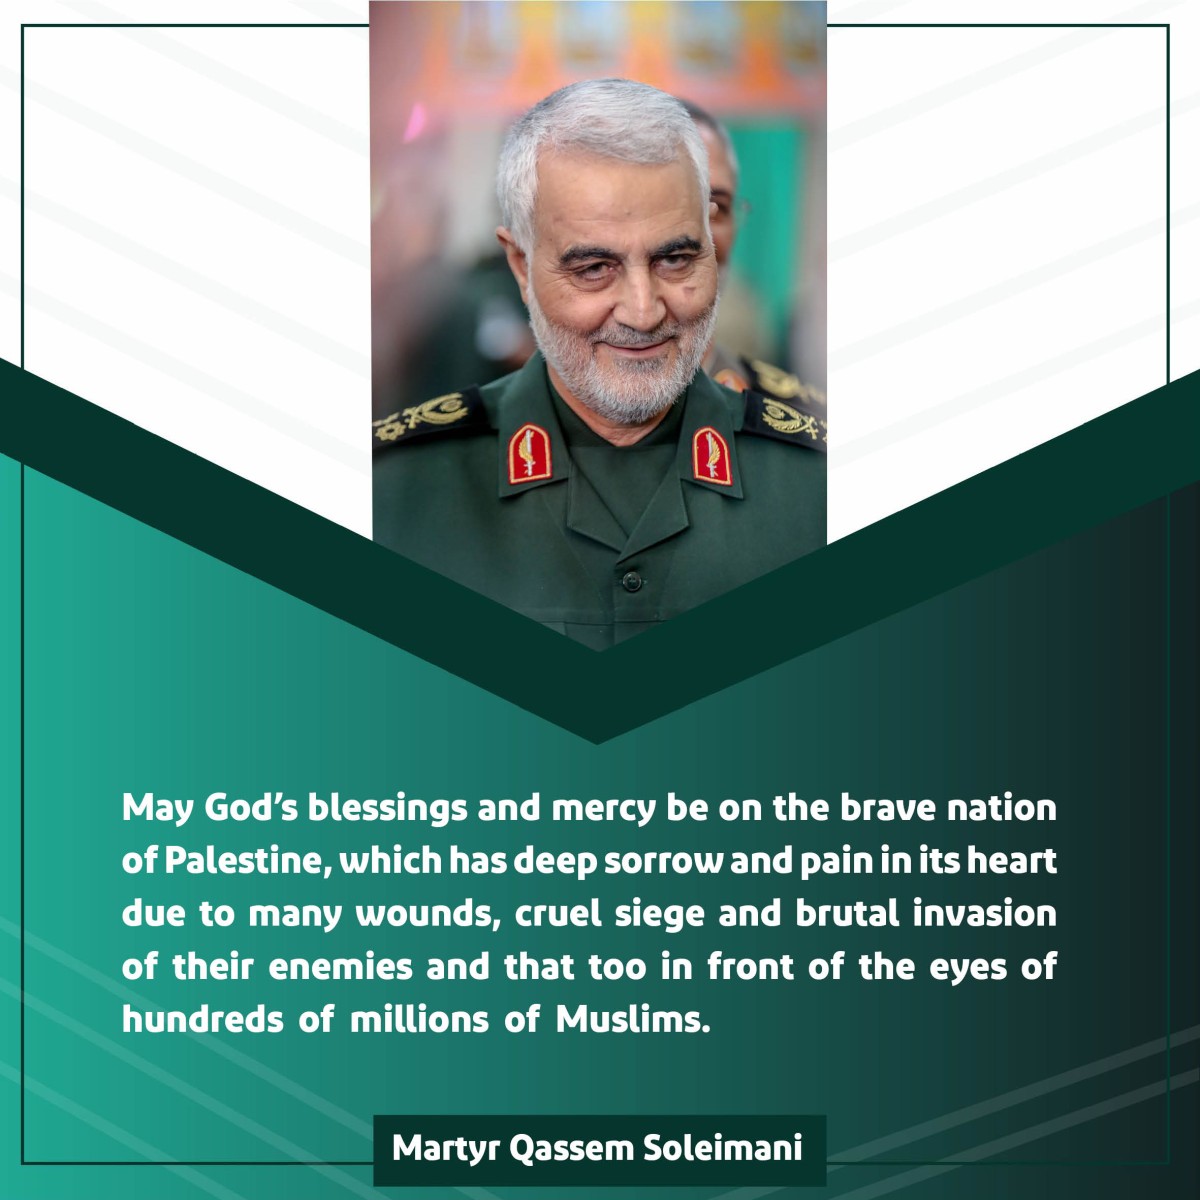  <a href="https://generalsoleimani.com/wp-admin/post.php?post=10879&action=edit">Poster Collection “General Soleimani’s remarks about Palestine”</a>